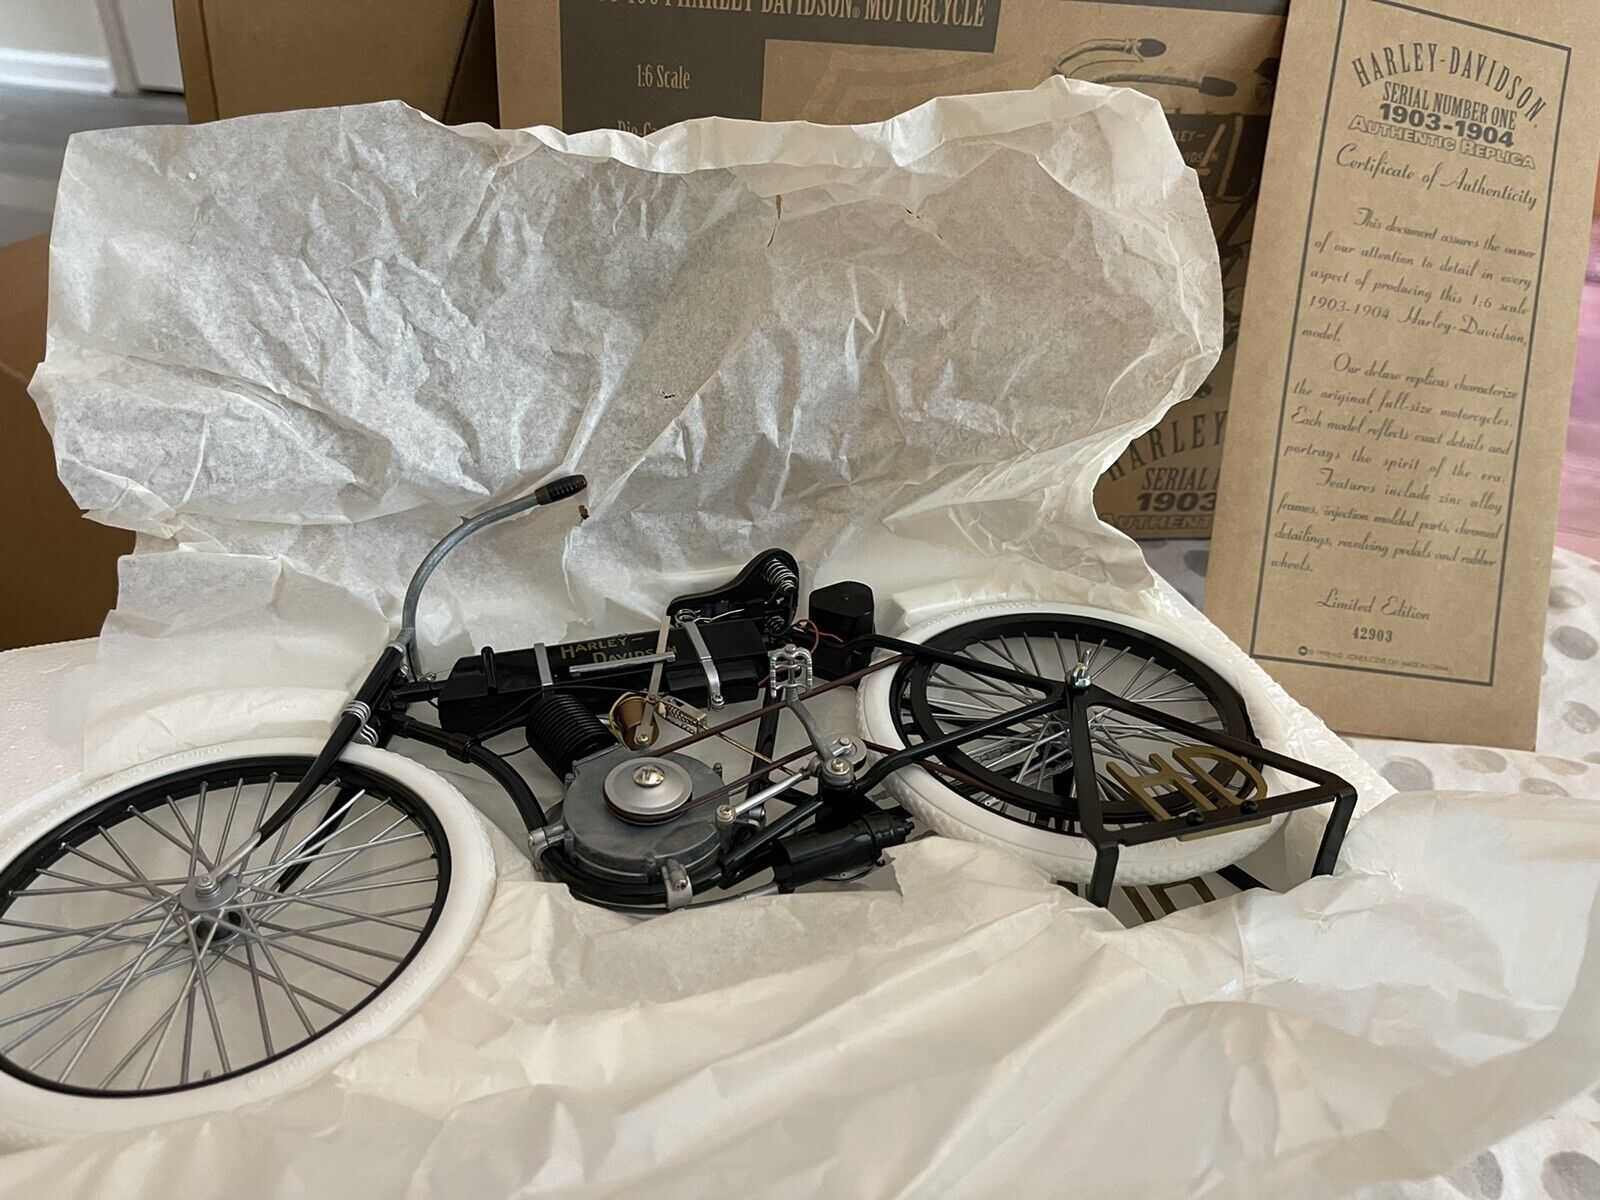 1903-1904 Harley Davidson Motorcycle 1:6 Scale With Certificate Of  Authenticity